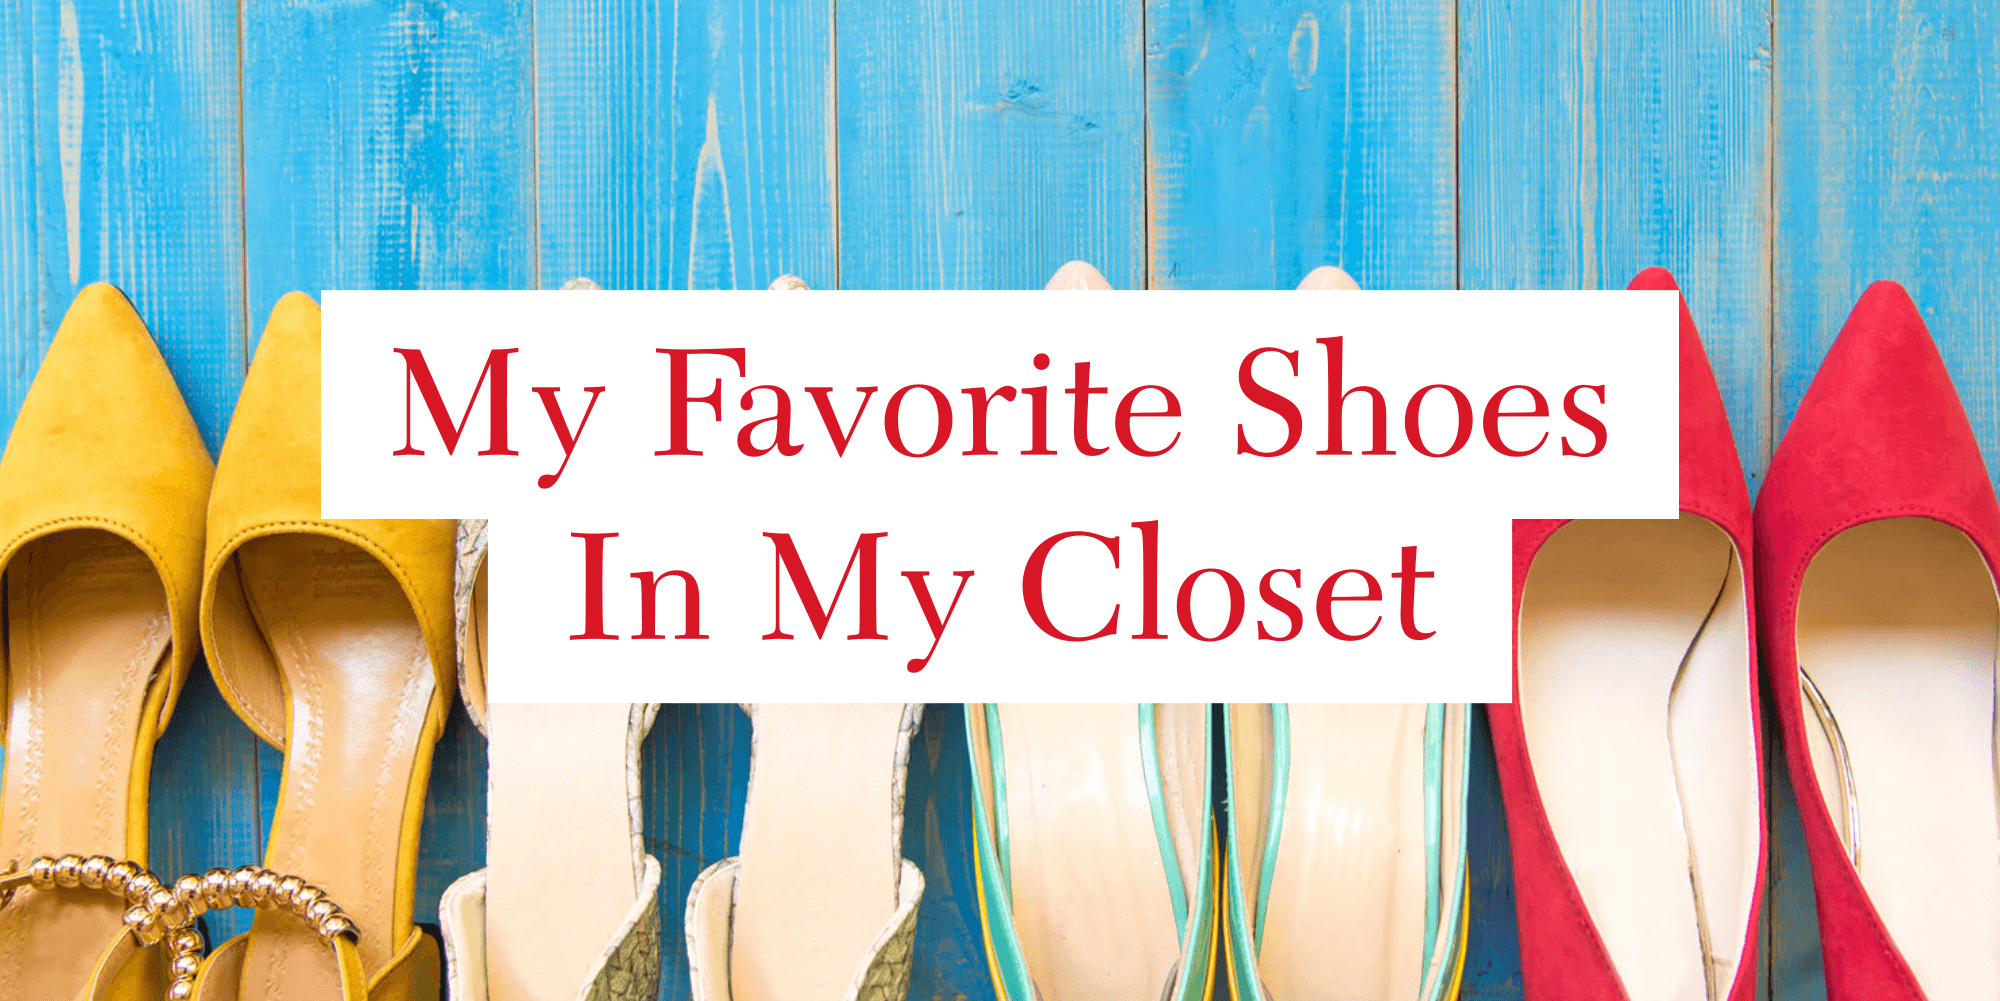 My Favorite Shoes In My Closet - Top 6 Pairs That Are Comfortable ...